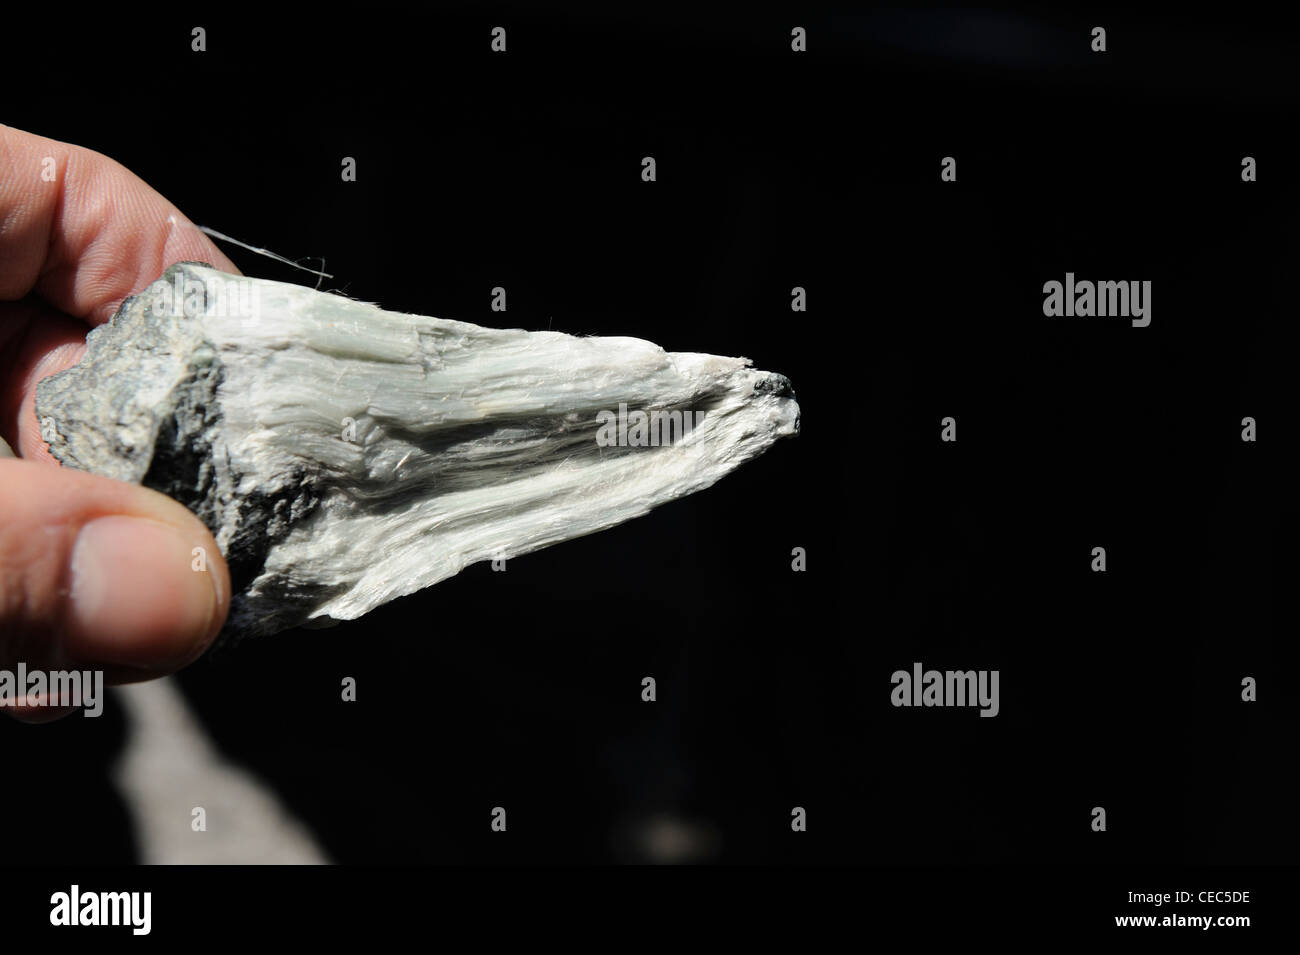 Abetsos Mineral, Fingers holding Asbestos Mineral Stock Photo